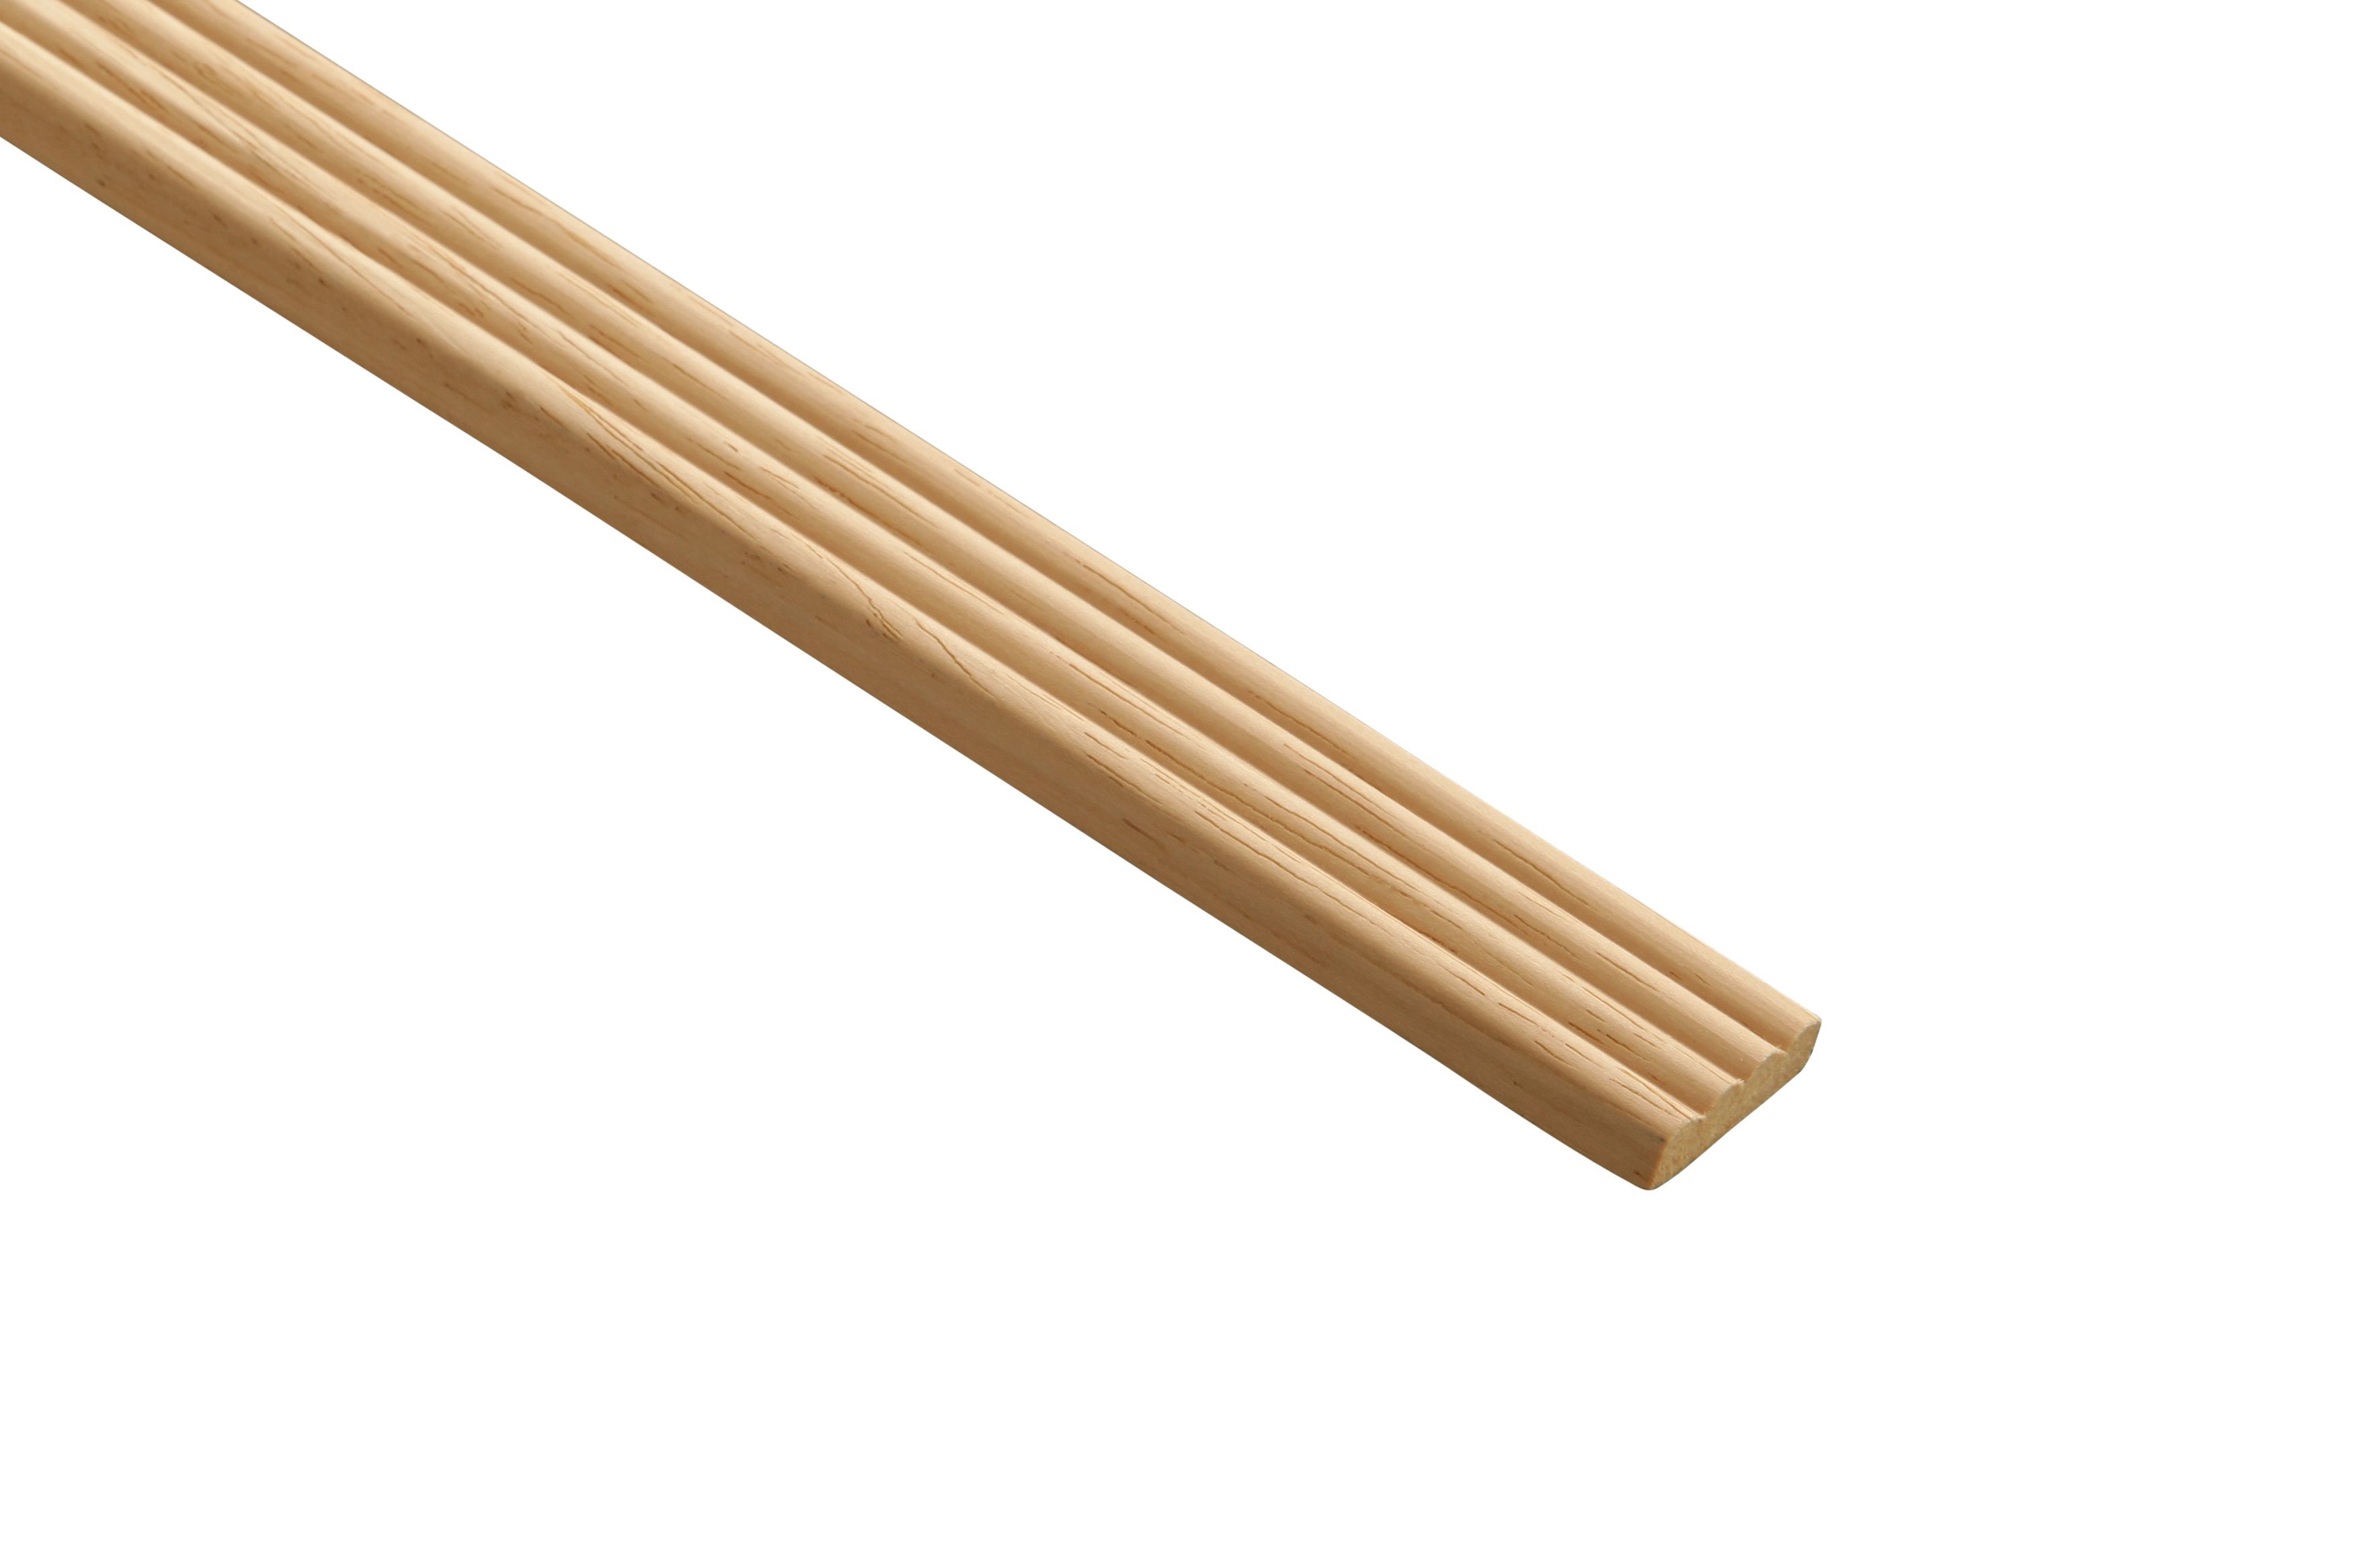 Image of Wickes Light Hardwood Reed Moulding - 21 x 6 x 2400mm